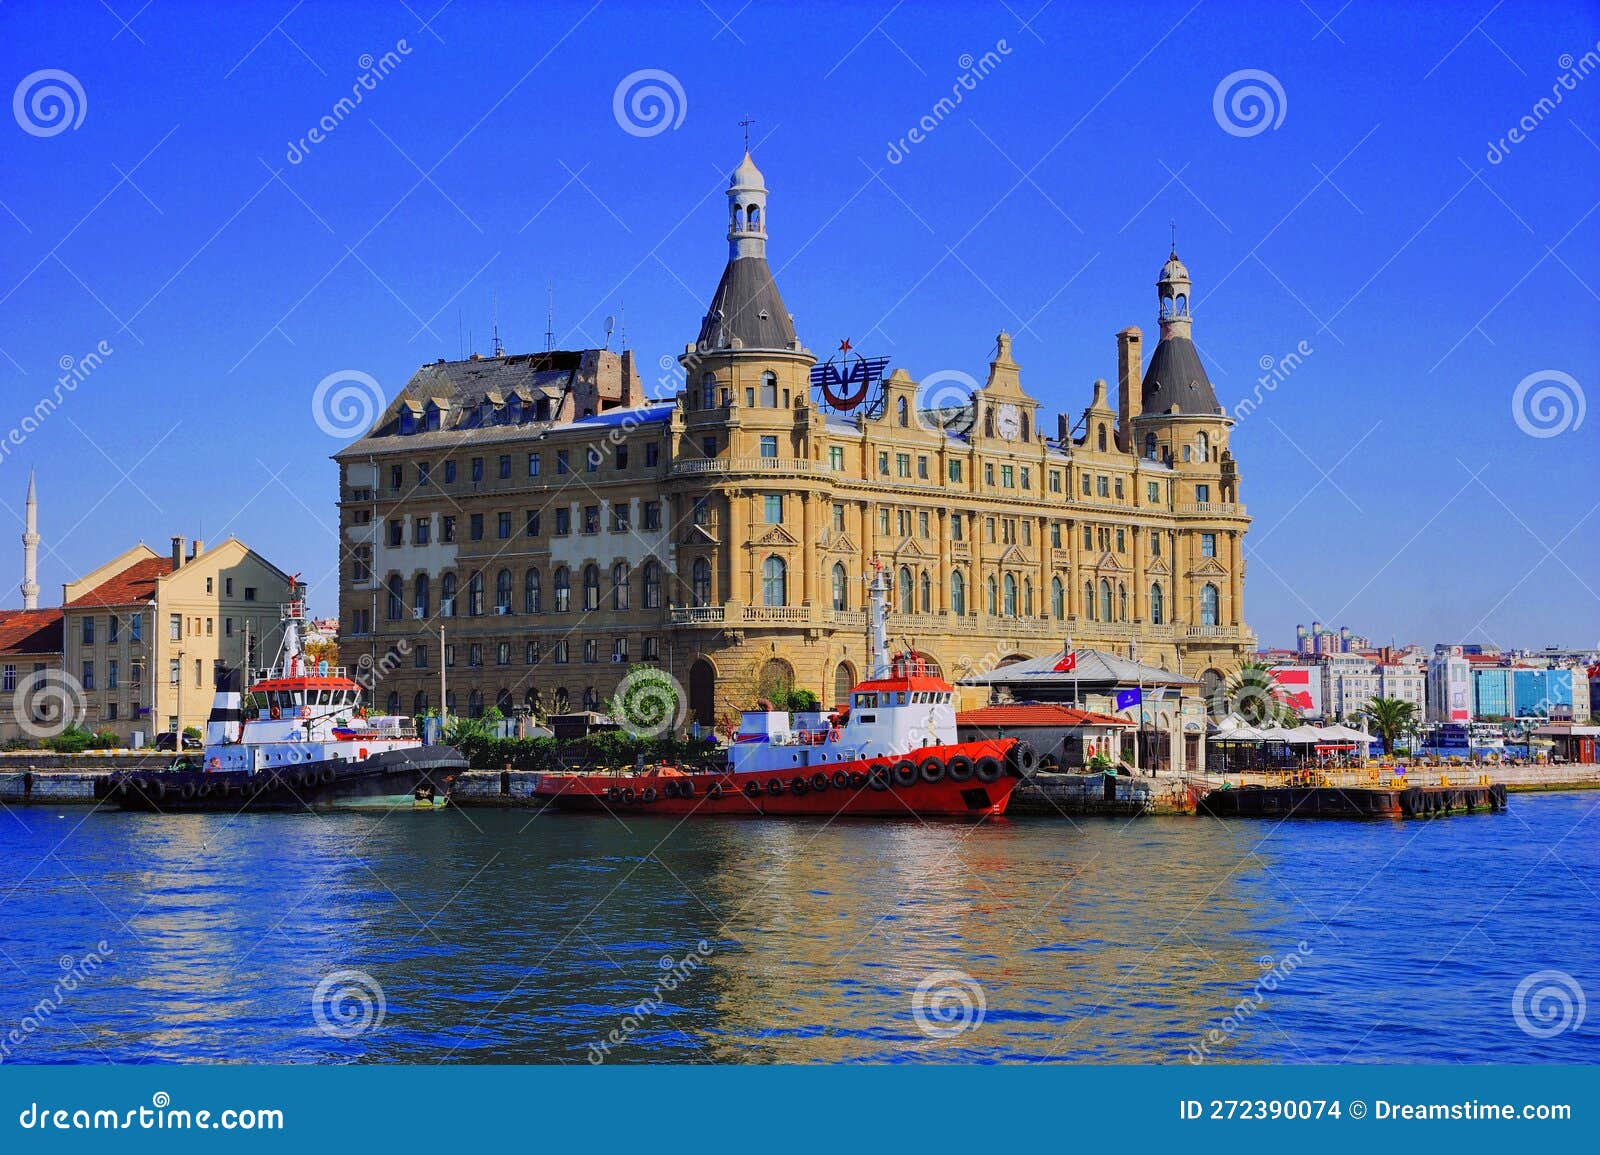 historical haydarpaa train station and the ferry port in front of istanbul